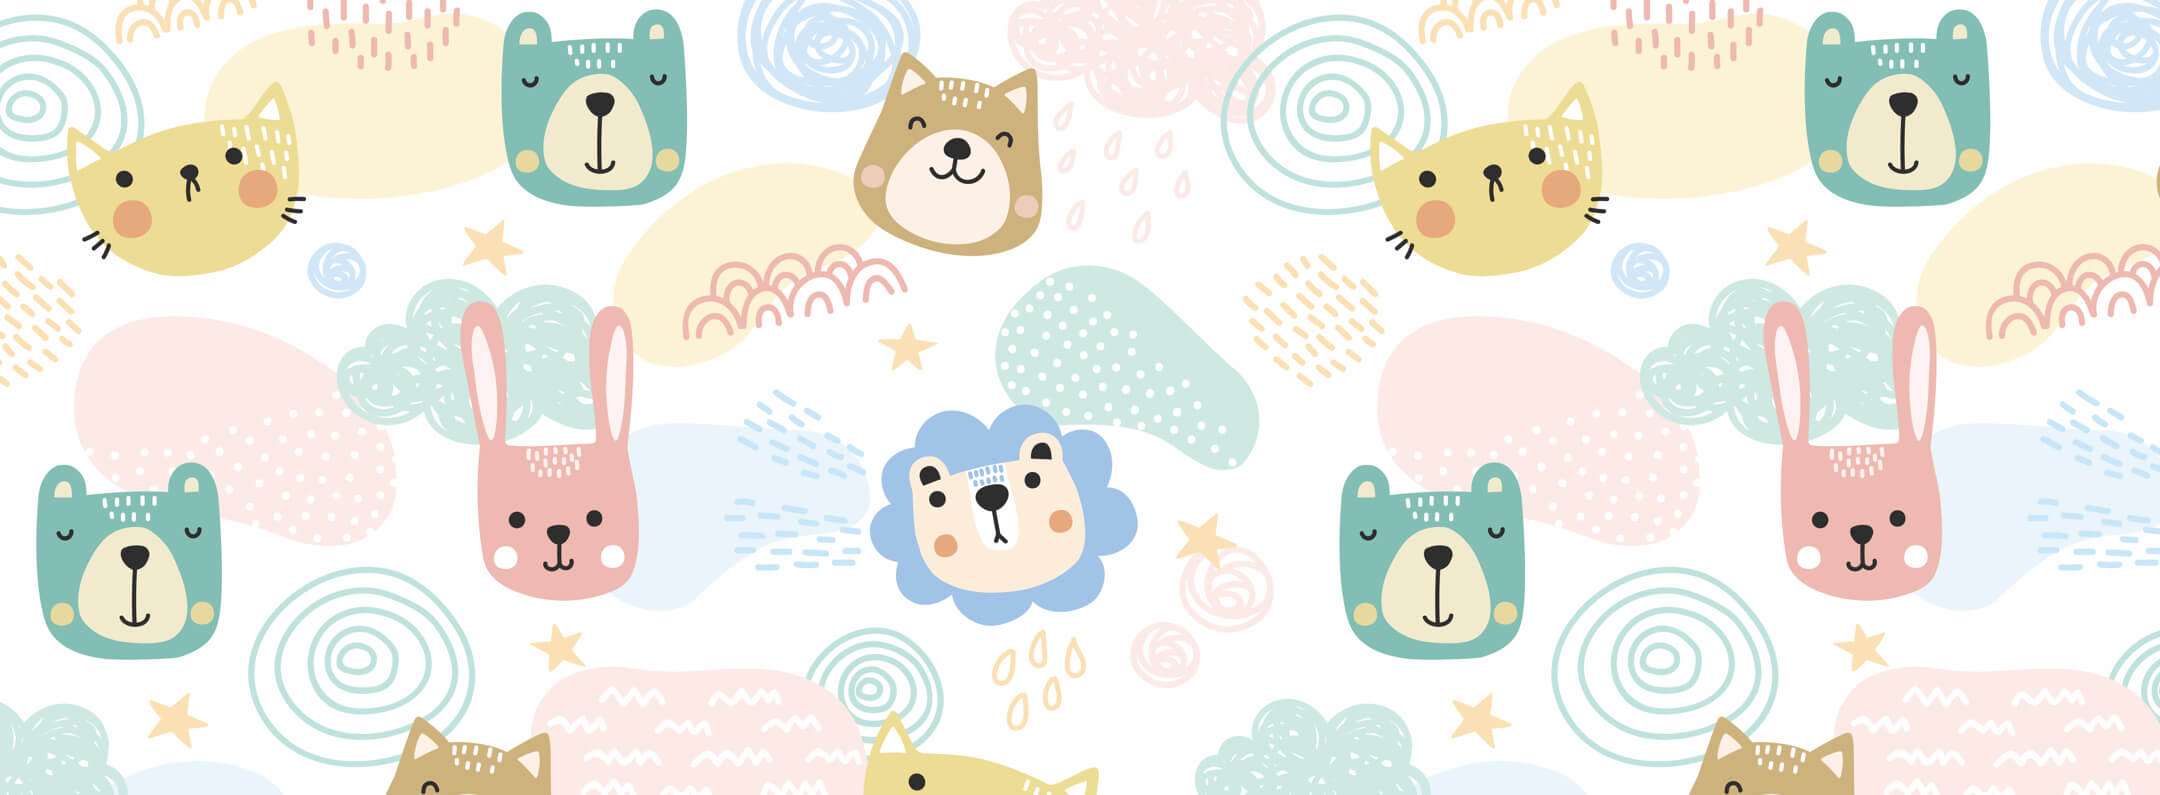 Cute Cat & Dog Animal Face Collection wallpaper